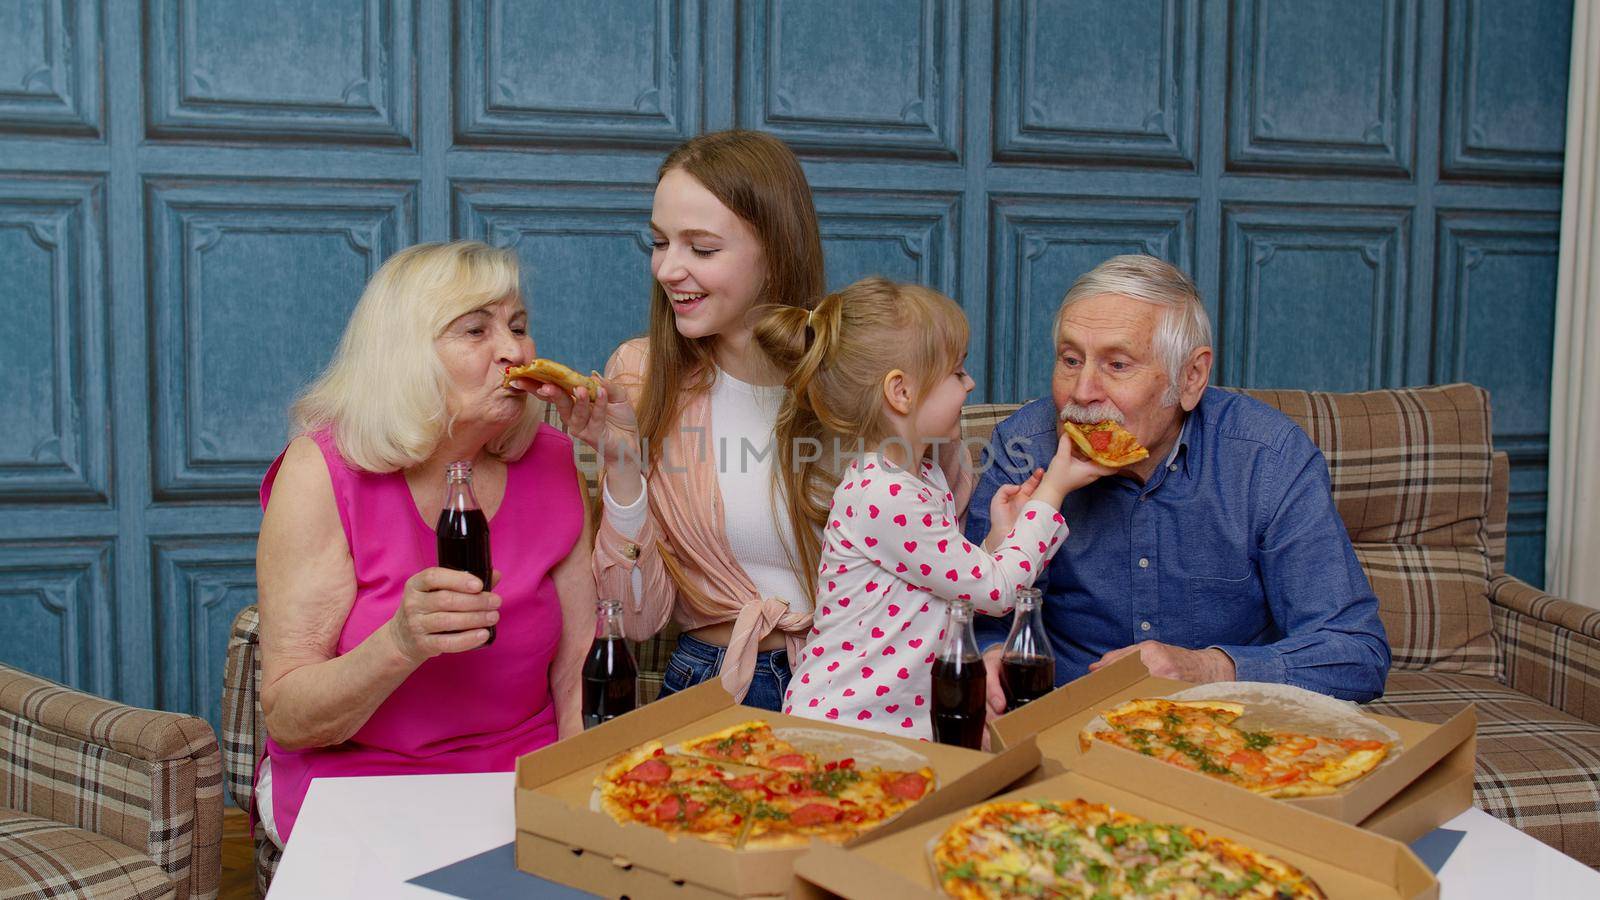 Multigenerational family having lunch party, feed each other with pizza, laughing, enjoying meal together at home. Grandparents with young woman and child. Celebration holidays, weekends, birthday